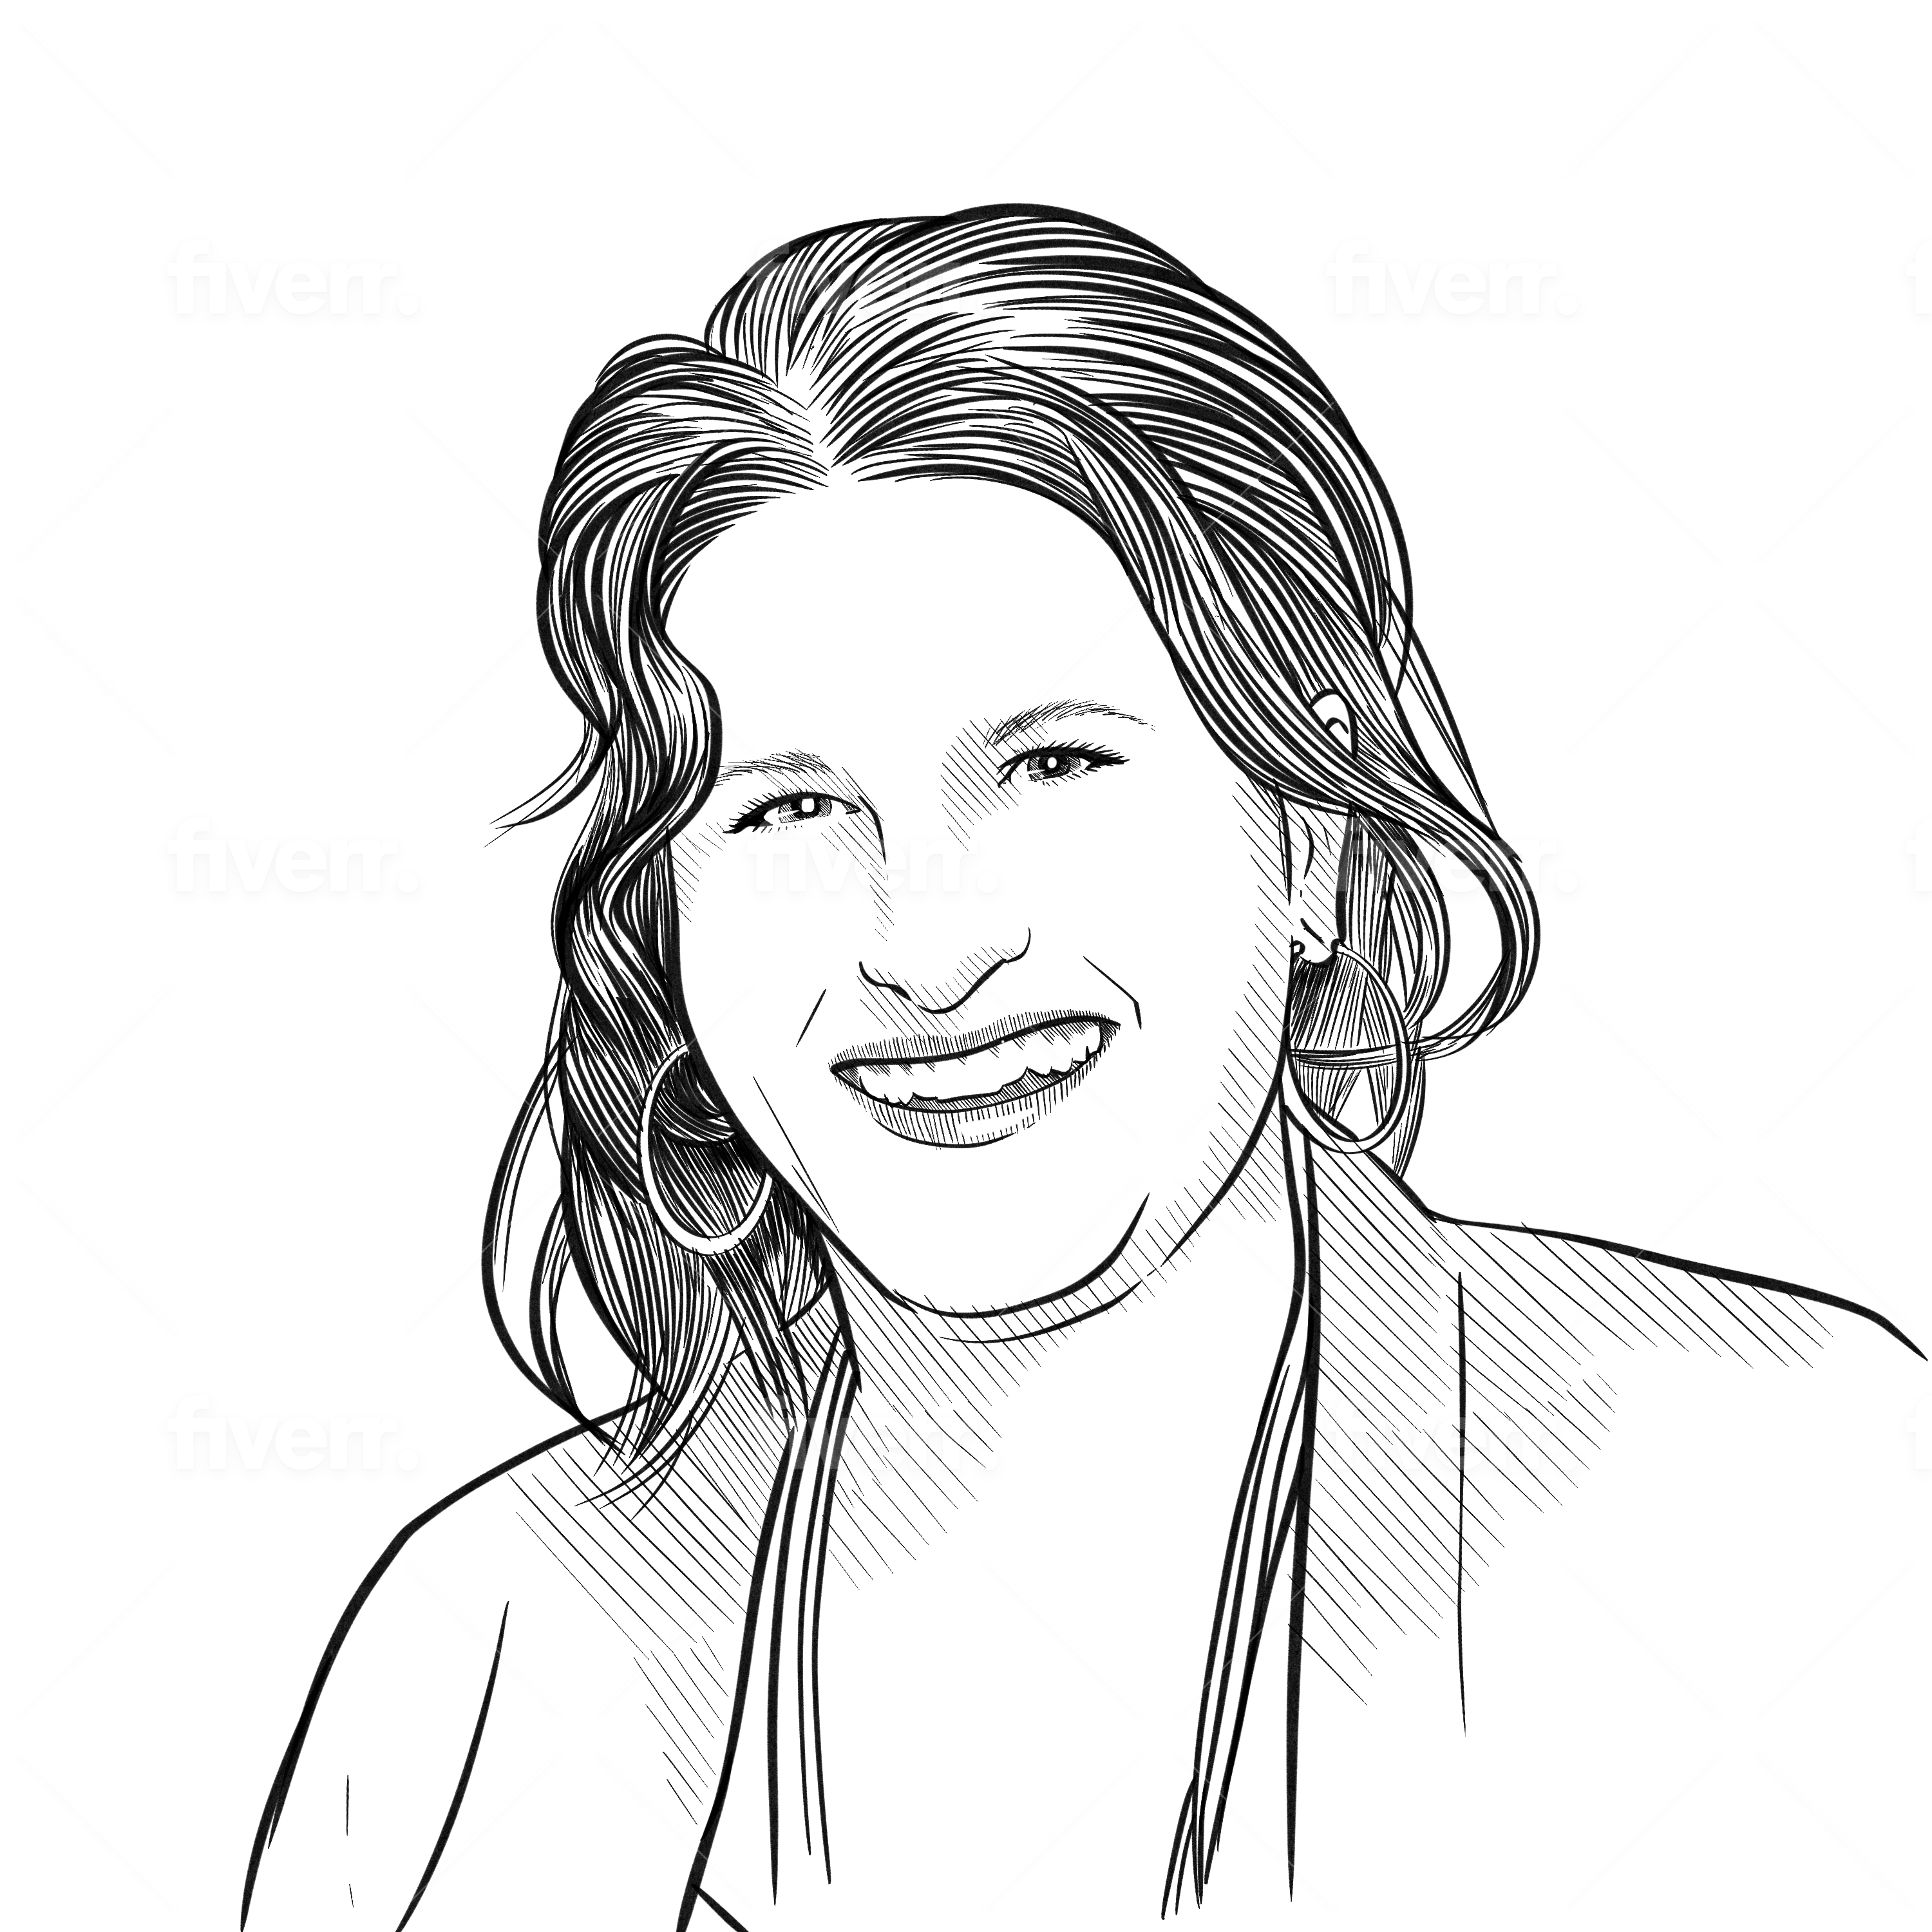 Black and white illustration of a person with an oval face, smiling, long hair swept to one side and past their shoulders. They are wearing dangling earrings, and have an opened, patterned sweater over a v neck shirt. 